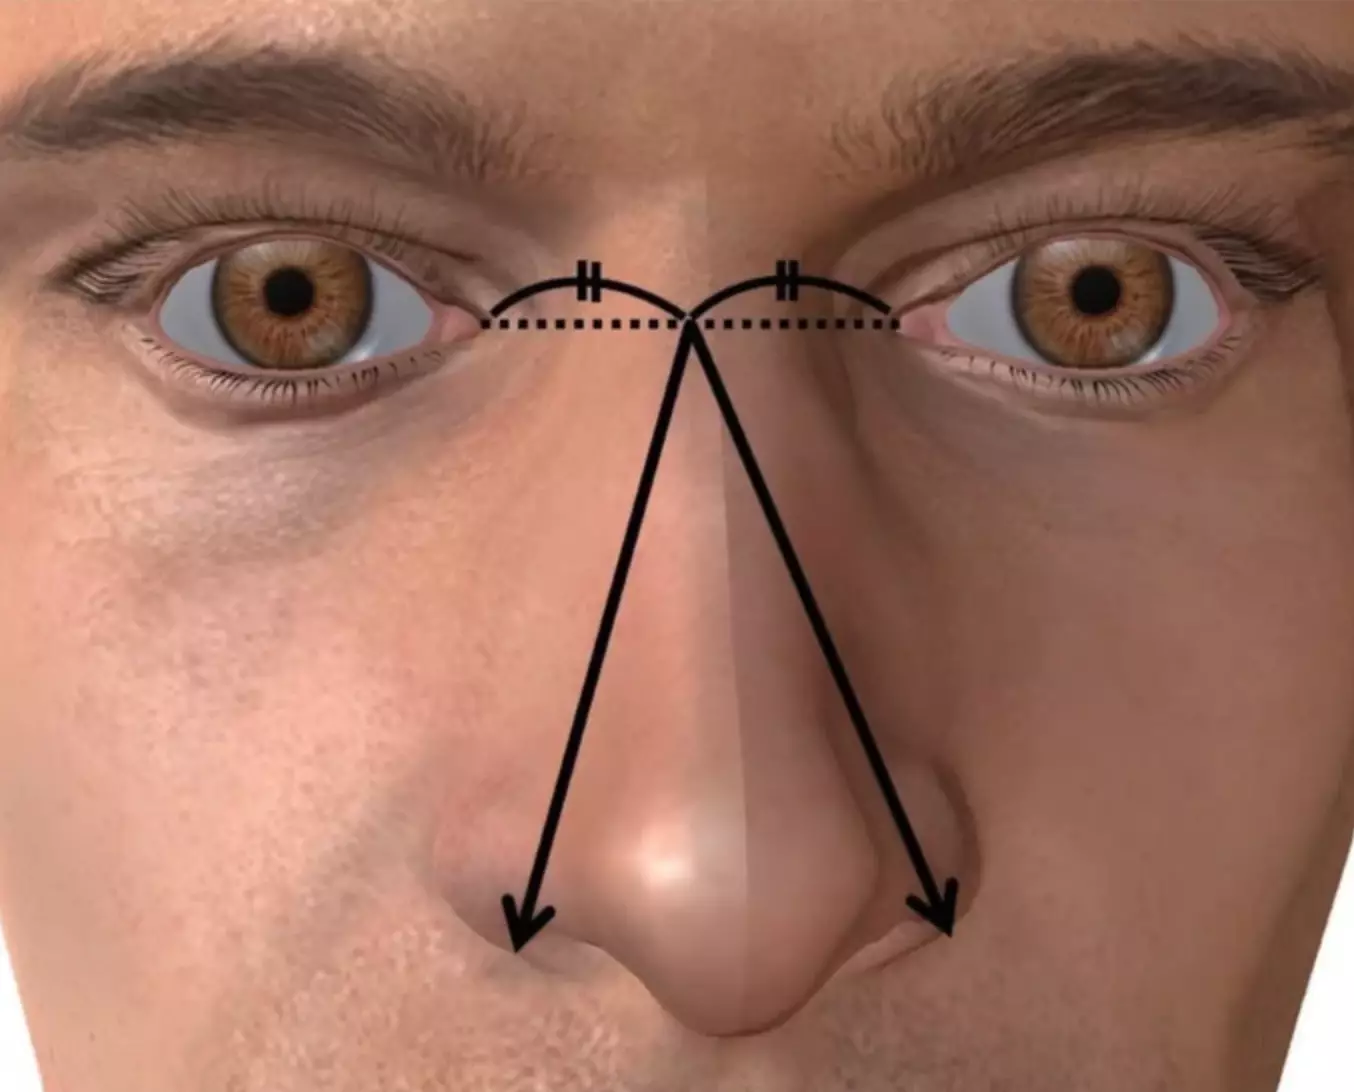 Nose size was defined as the longer distance between the midpoint of the left and right medial ocular angles and the outside of the left or right nose wings.